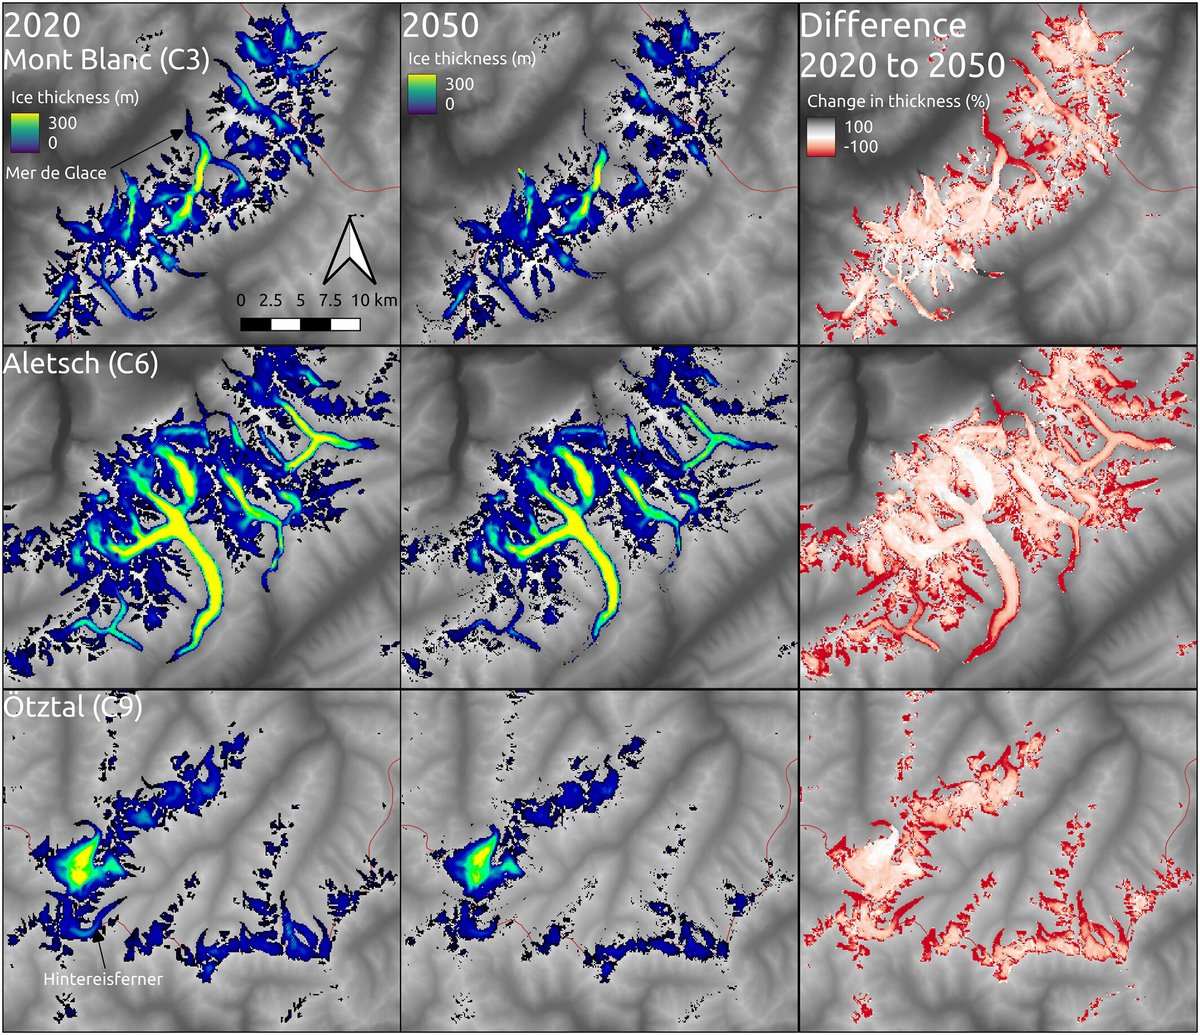 Ice thickness in 2020 (first column) and 2050 (second column), and difference between them (third column) for the Mont Blanc massif, on the top row © Geophysical Research Letters